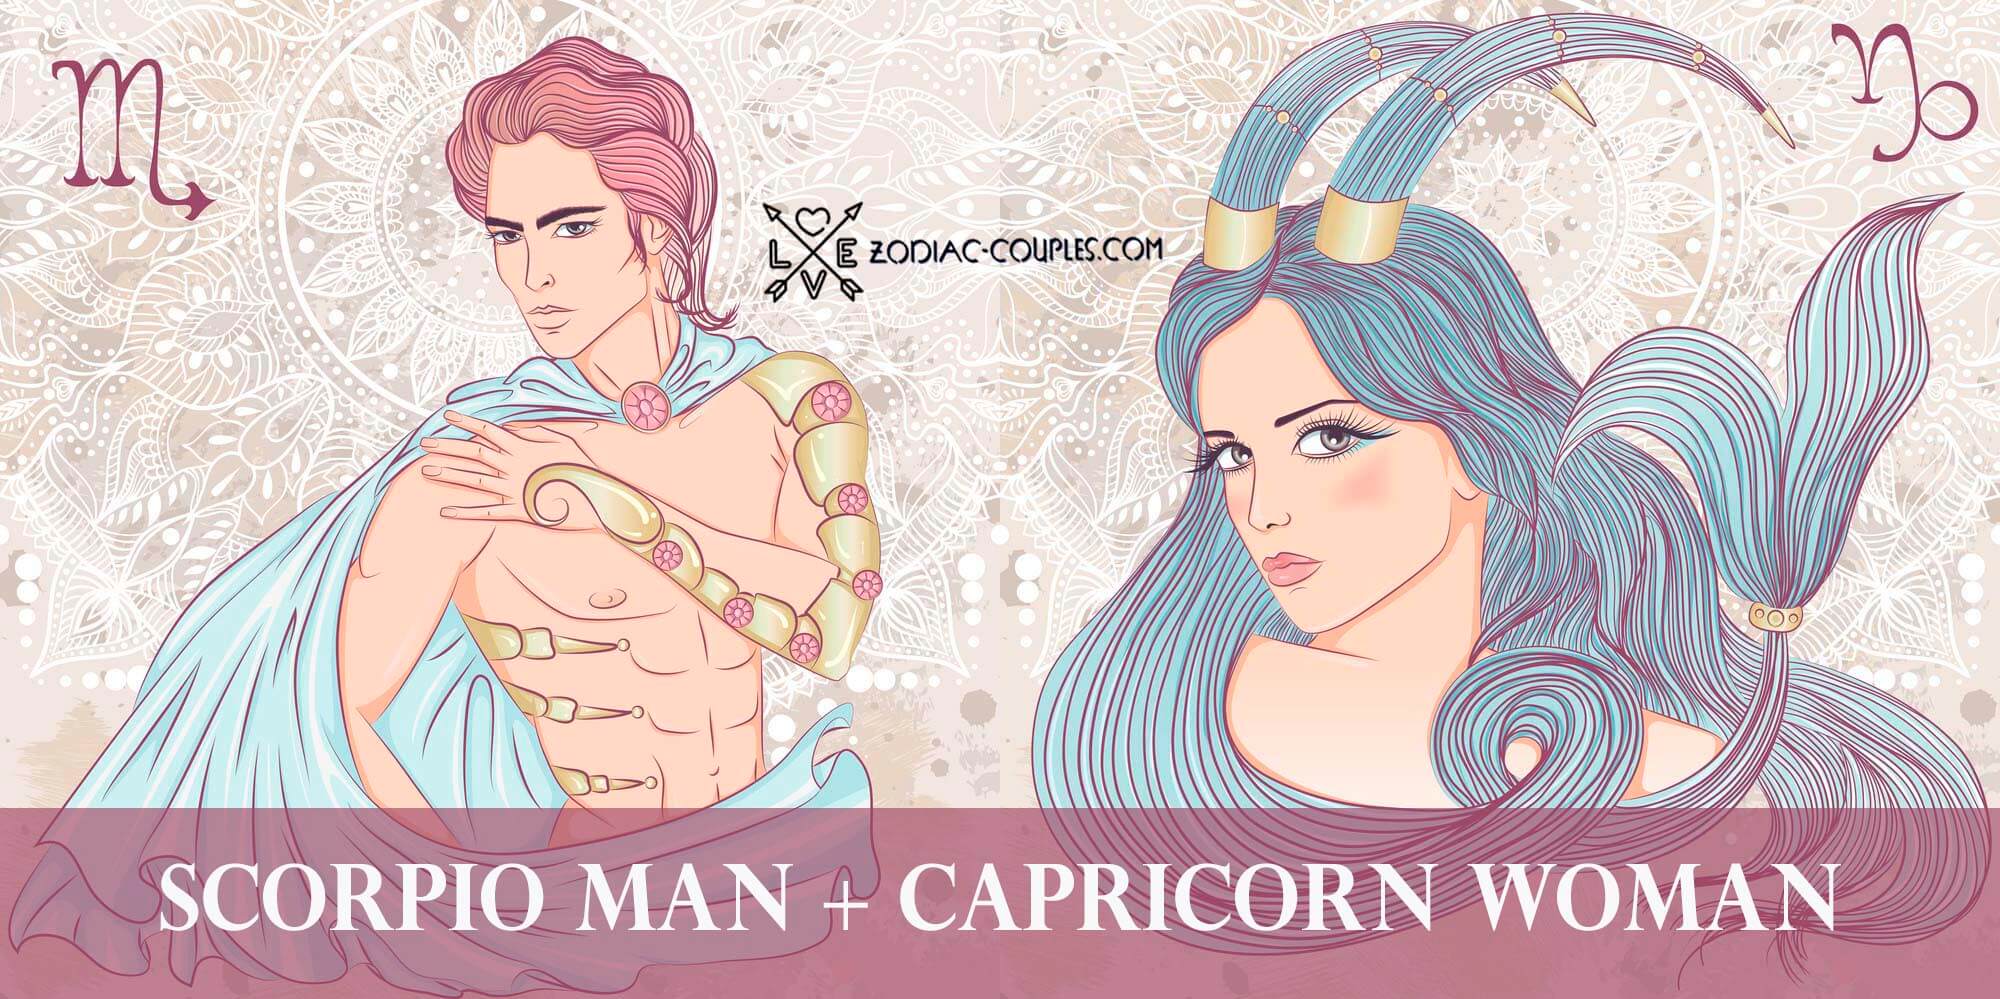 Relationships and capricorn woman Capricorn Compatibility: